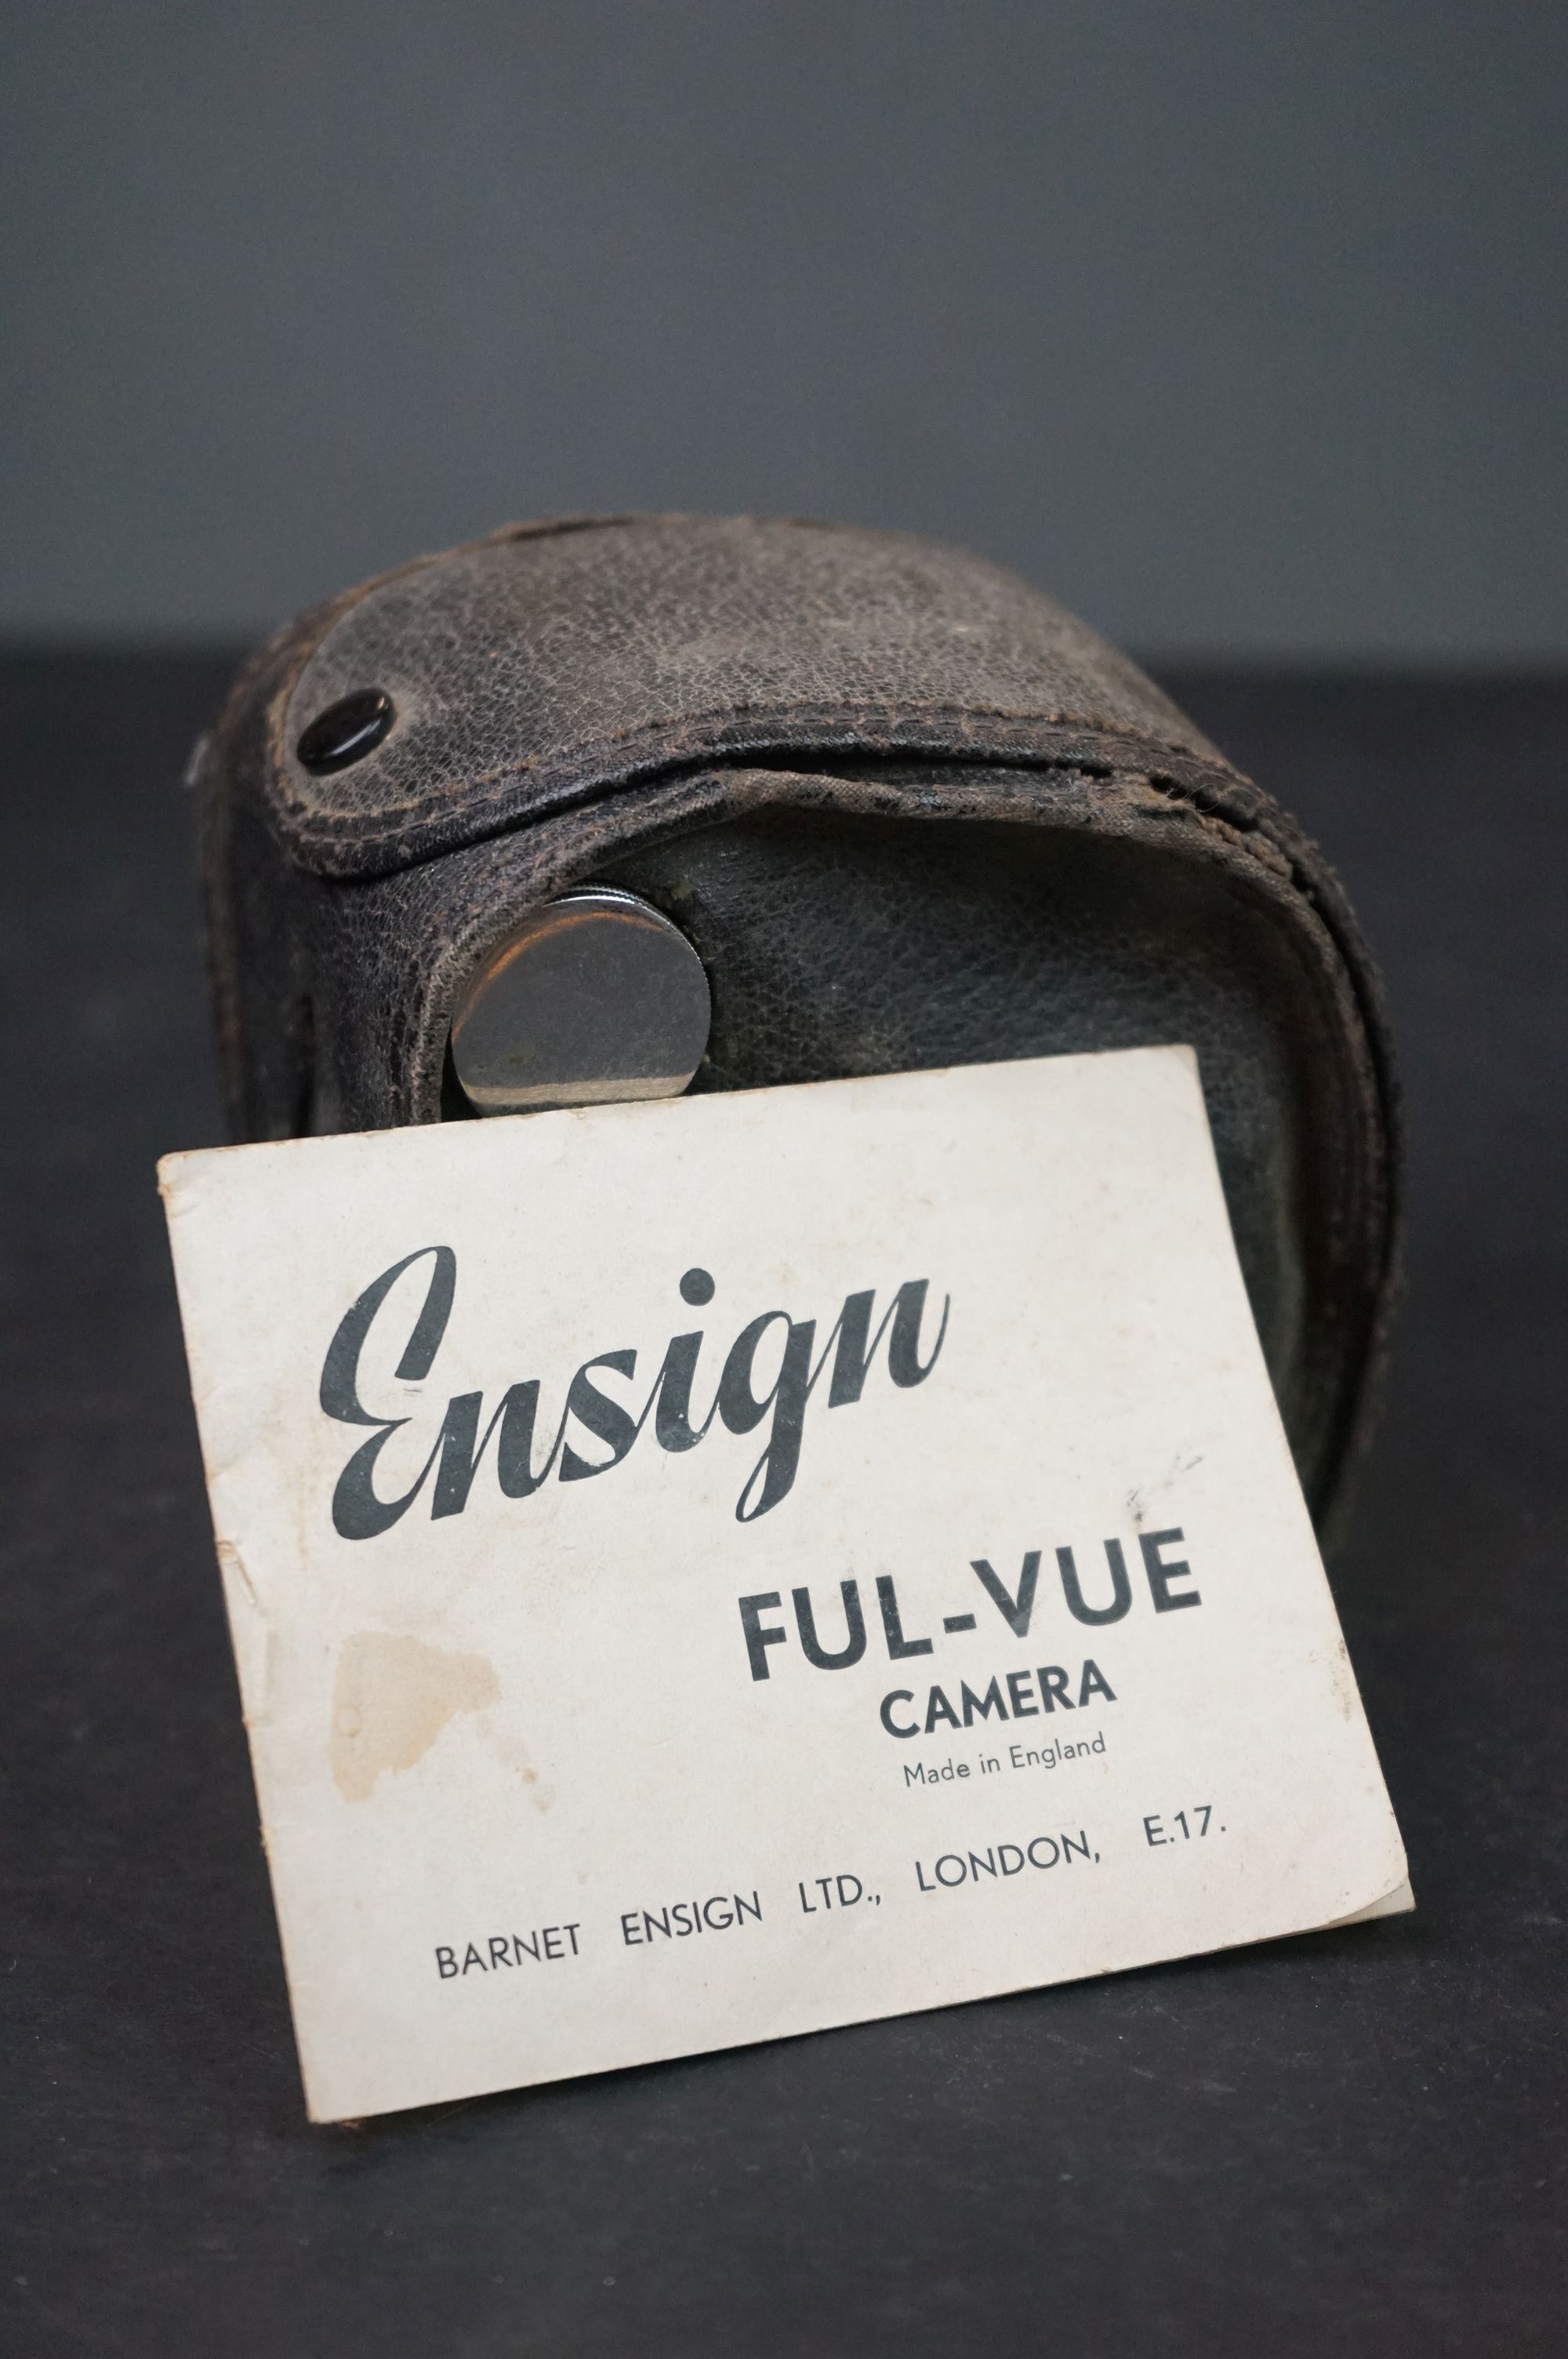 Leather Cased Cooke Process Lens Prism no. 531331 by Taylor-Hobson together with Ensign Ful-vue - Image 10 of 16